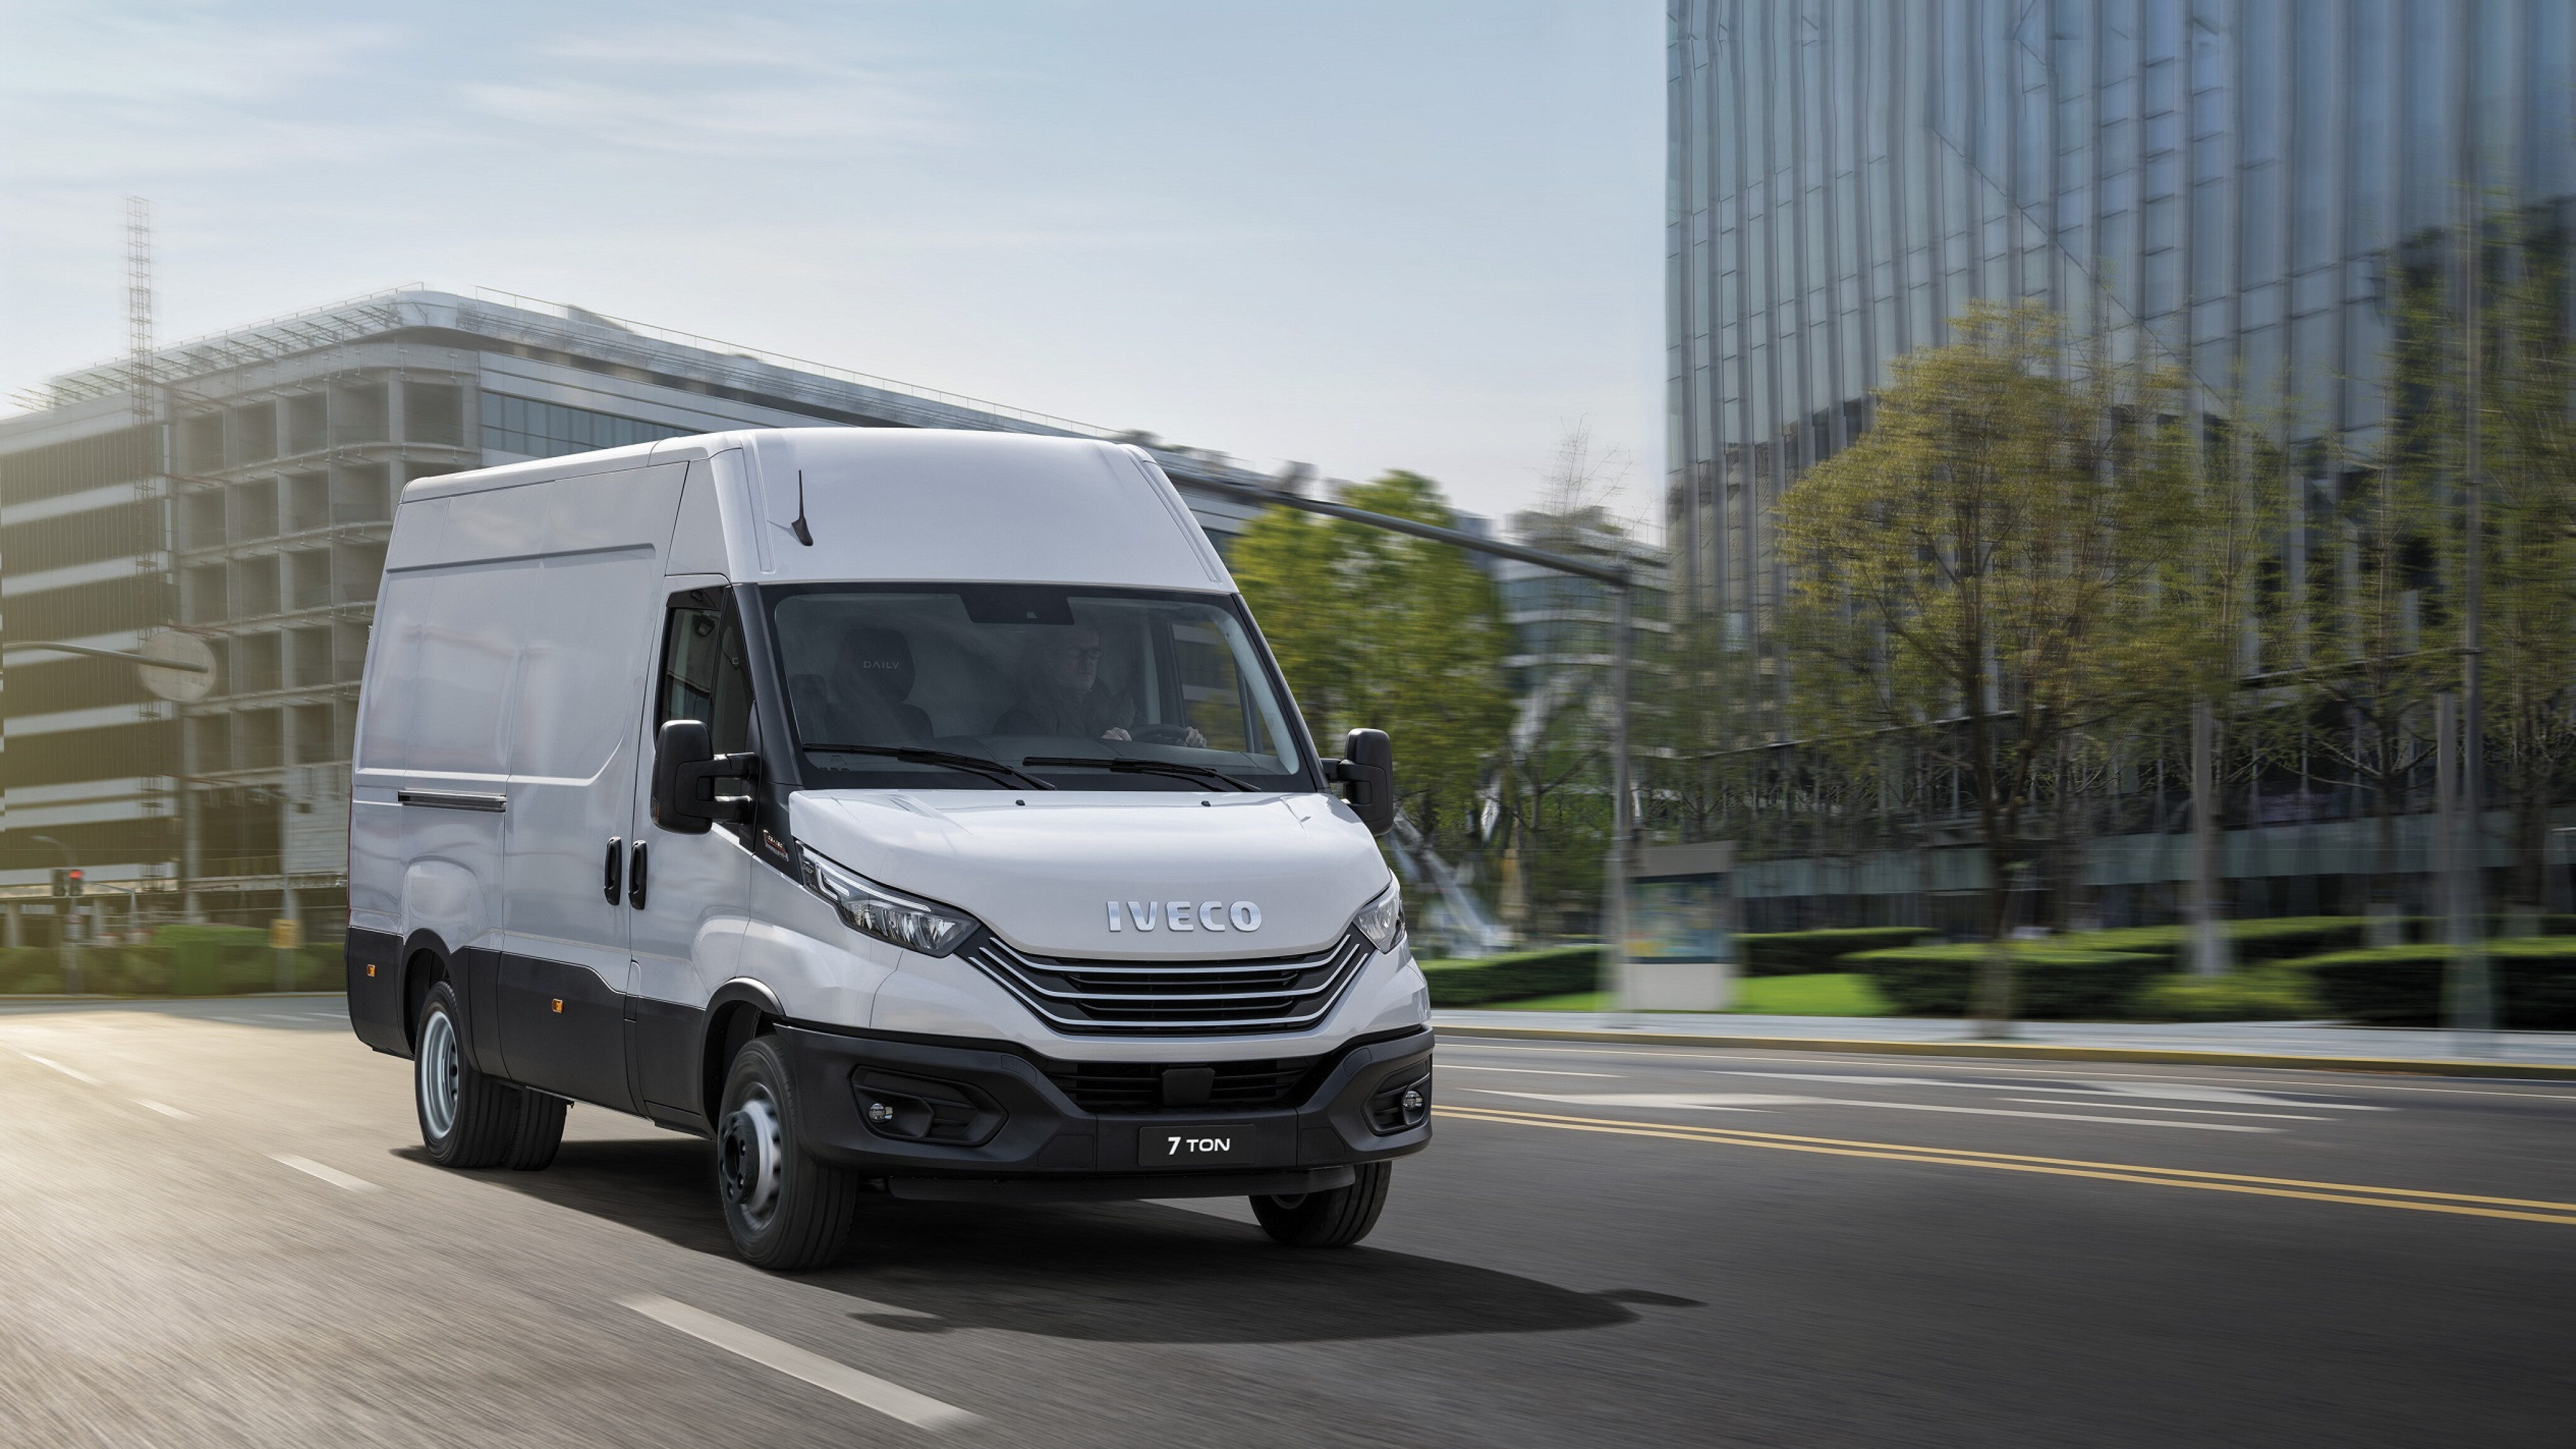 2022 Iveco Daily E6 updates detailed